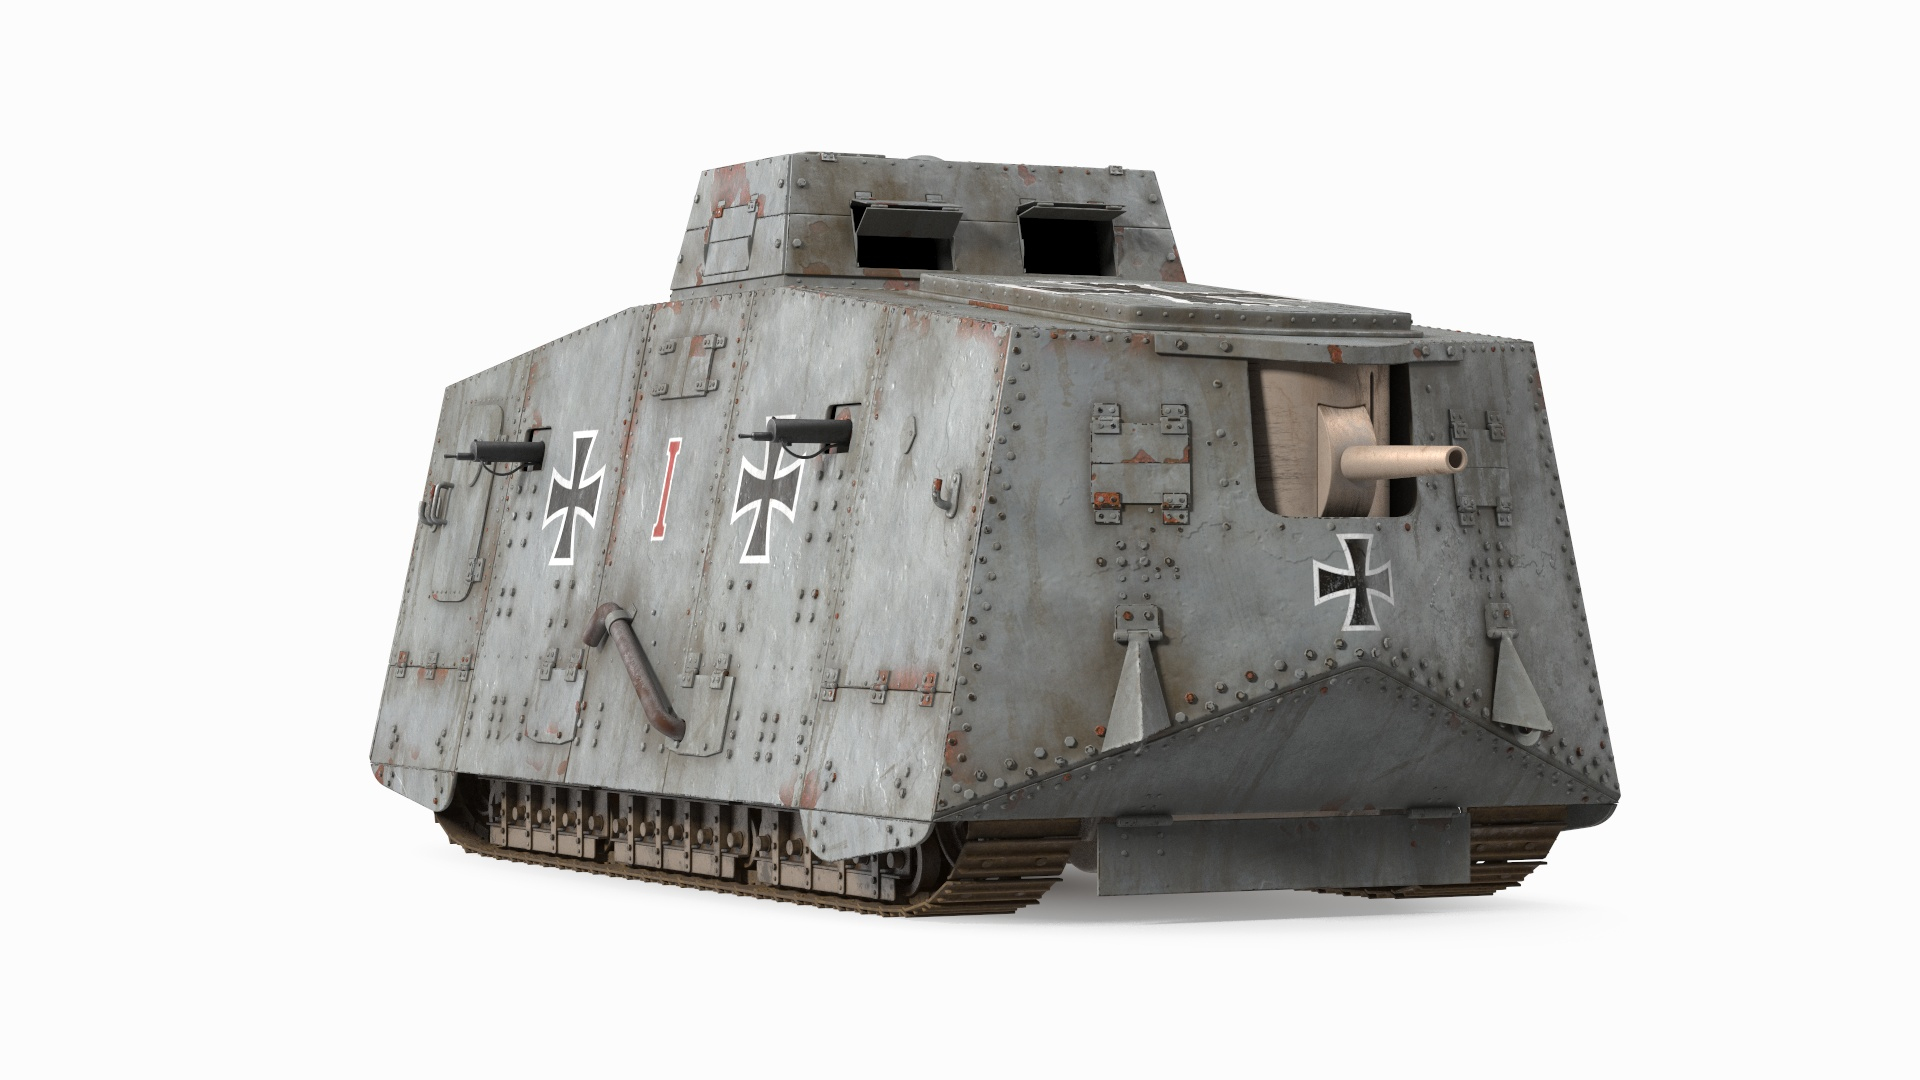 Old Aged WWI German A7V Armored Vehicle Tank 3D https://p.turbosquid.com/ts-thumb/RK/MP9DtT/94/old_aged_wwi_german_a7v_armored_vehicle_tank_360/jpg/1703291776/1920x1080/turn_fit_q99/a465f50cb7fe07e3c2276161de1db33c8f5f7364/old_aged_wwi_german_a7v_armored_vehicle_tank_360-1.jpg